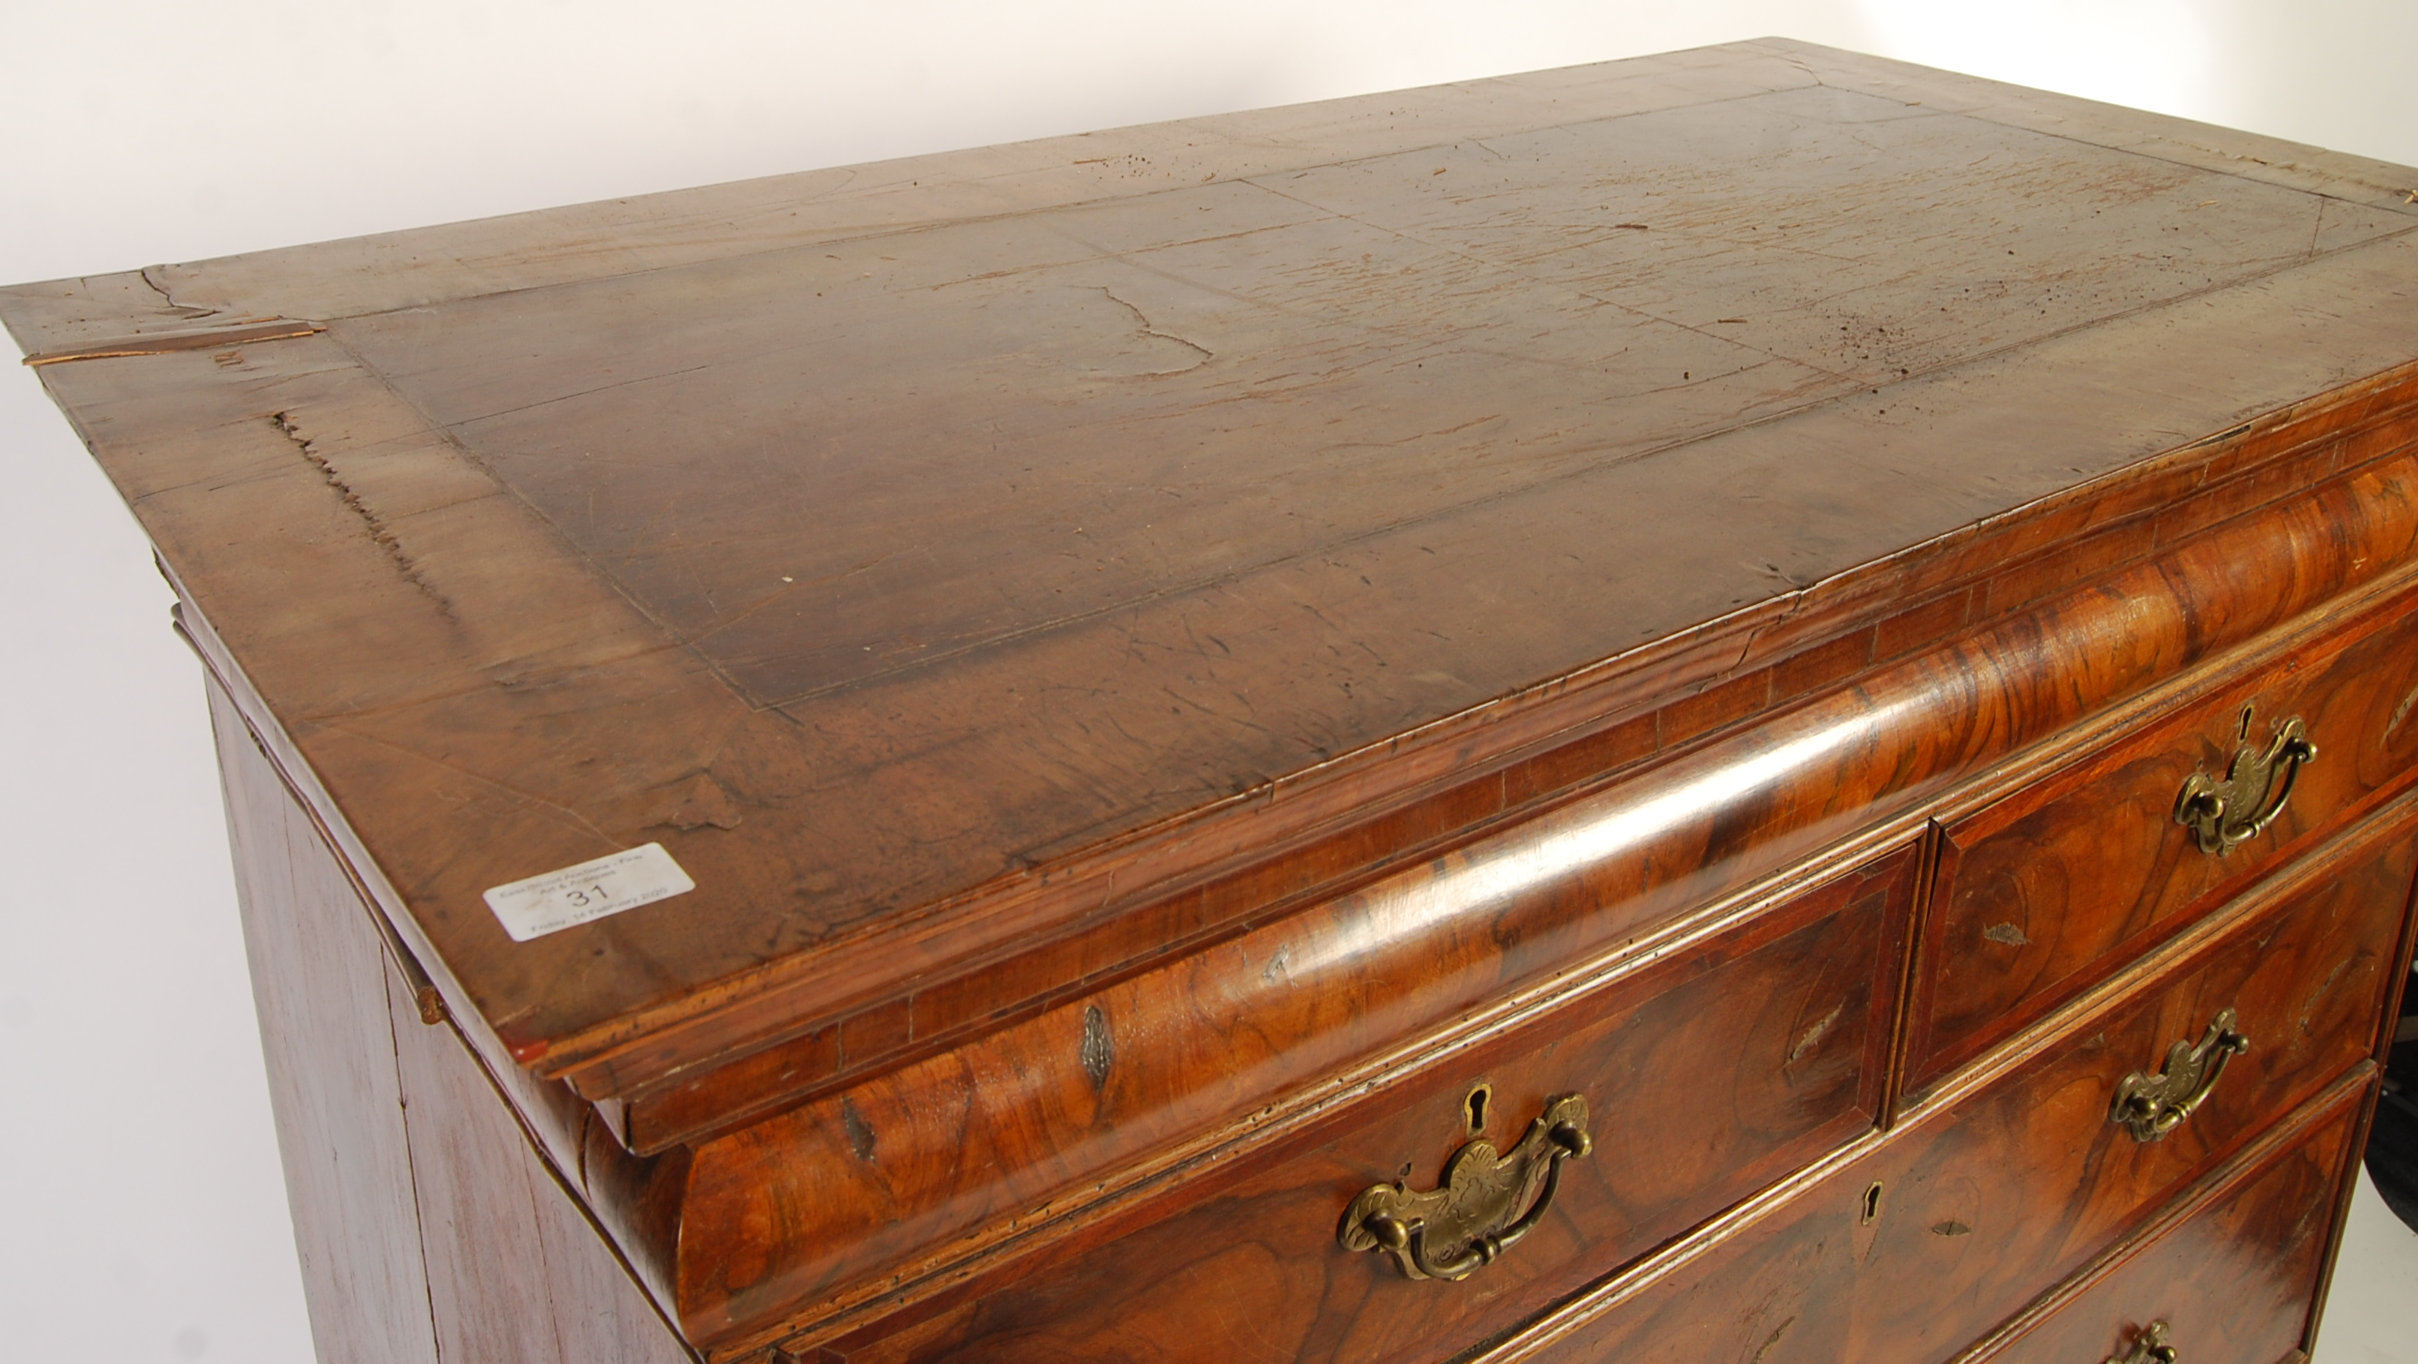 LATE 17TH / 18TH CENTURY WALNUT CHEST ON STAND - Image 6 of 11